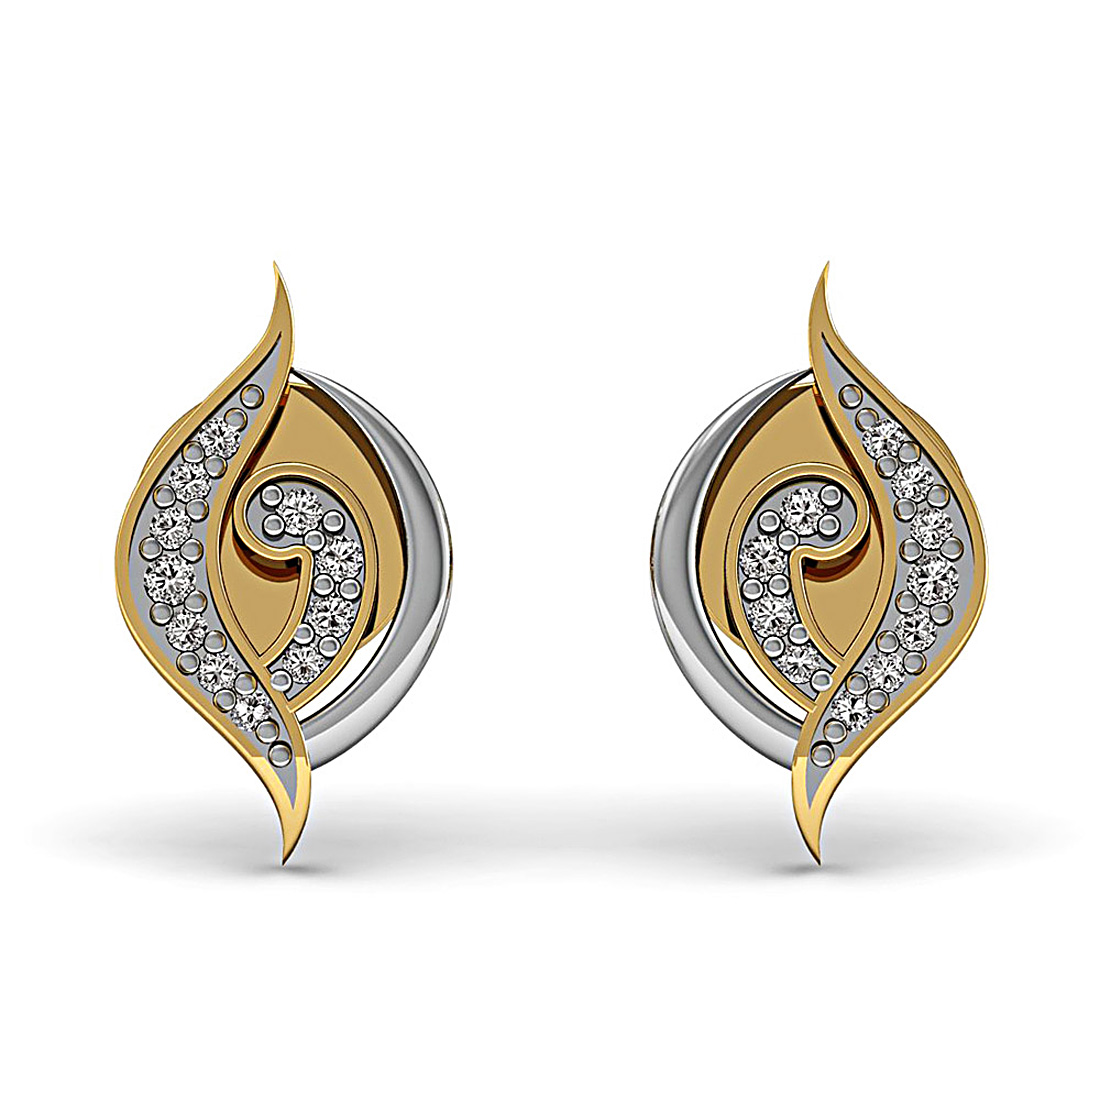 18k solid gold evil shape stud earrings with real diamond